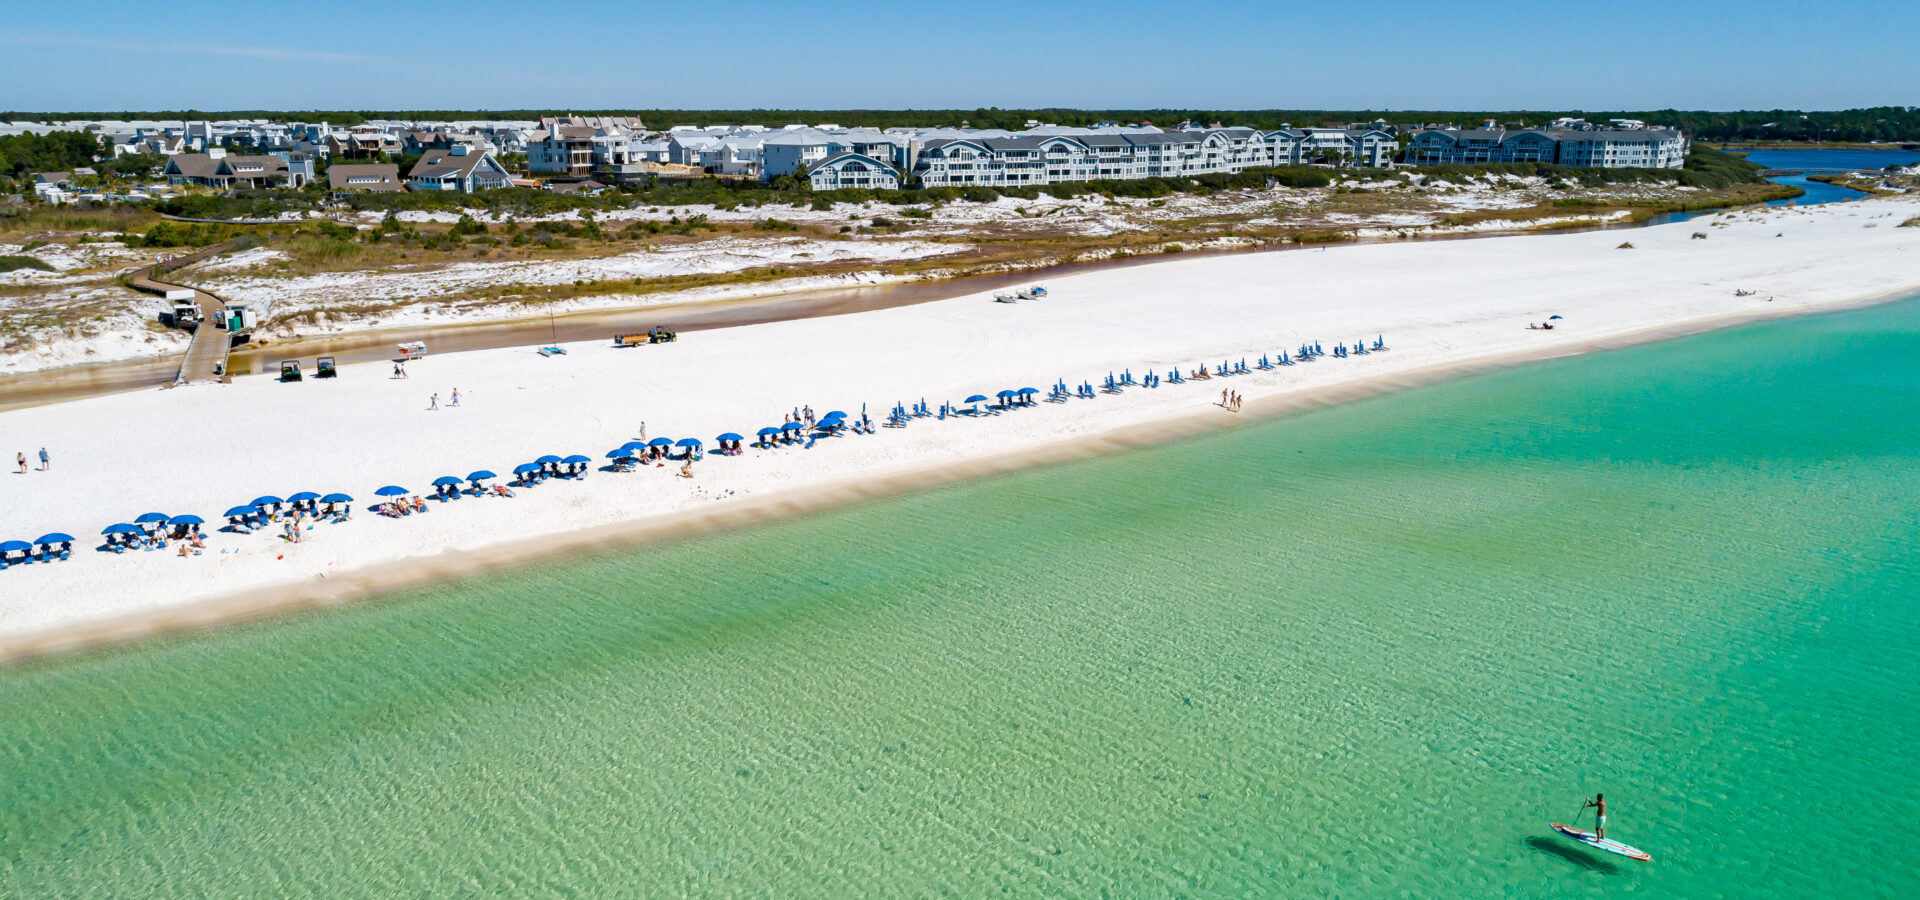 Bright blue beach chairs and umbrellas lined perfectly in a row on the white sandy shoreline of Watersound Beach, overlooking the beautiful emerald green and blue waters of the Gulf of Mexico where a man is paddleboarding on the flat water surface